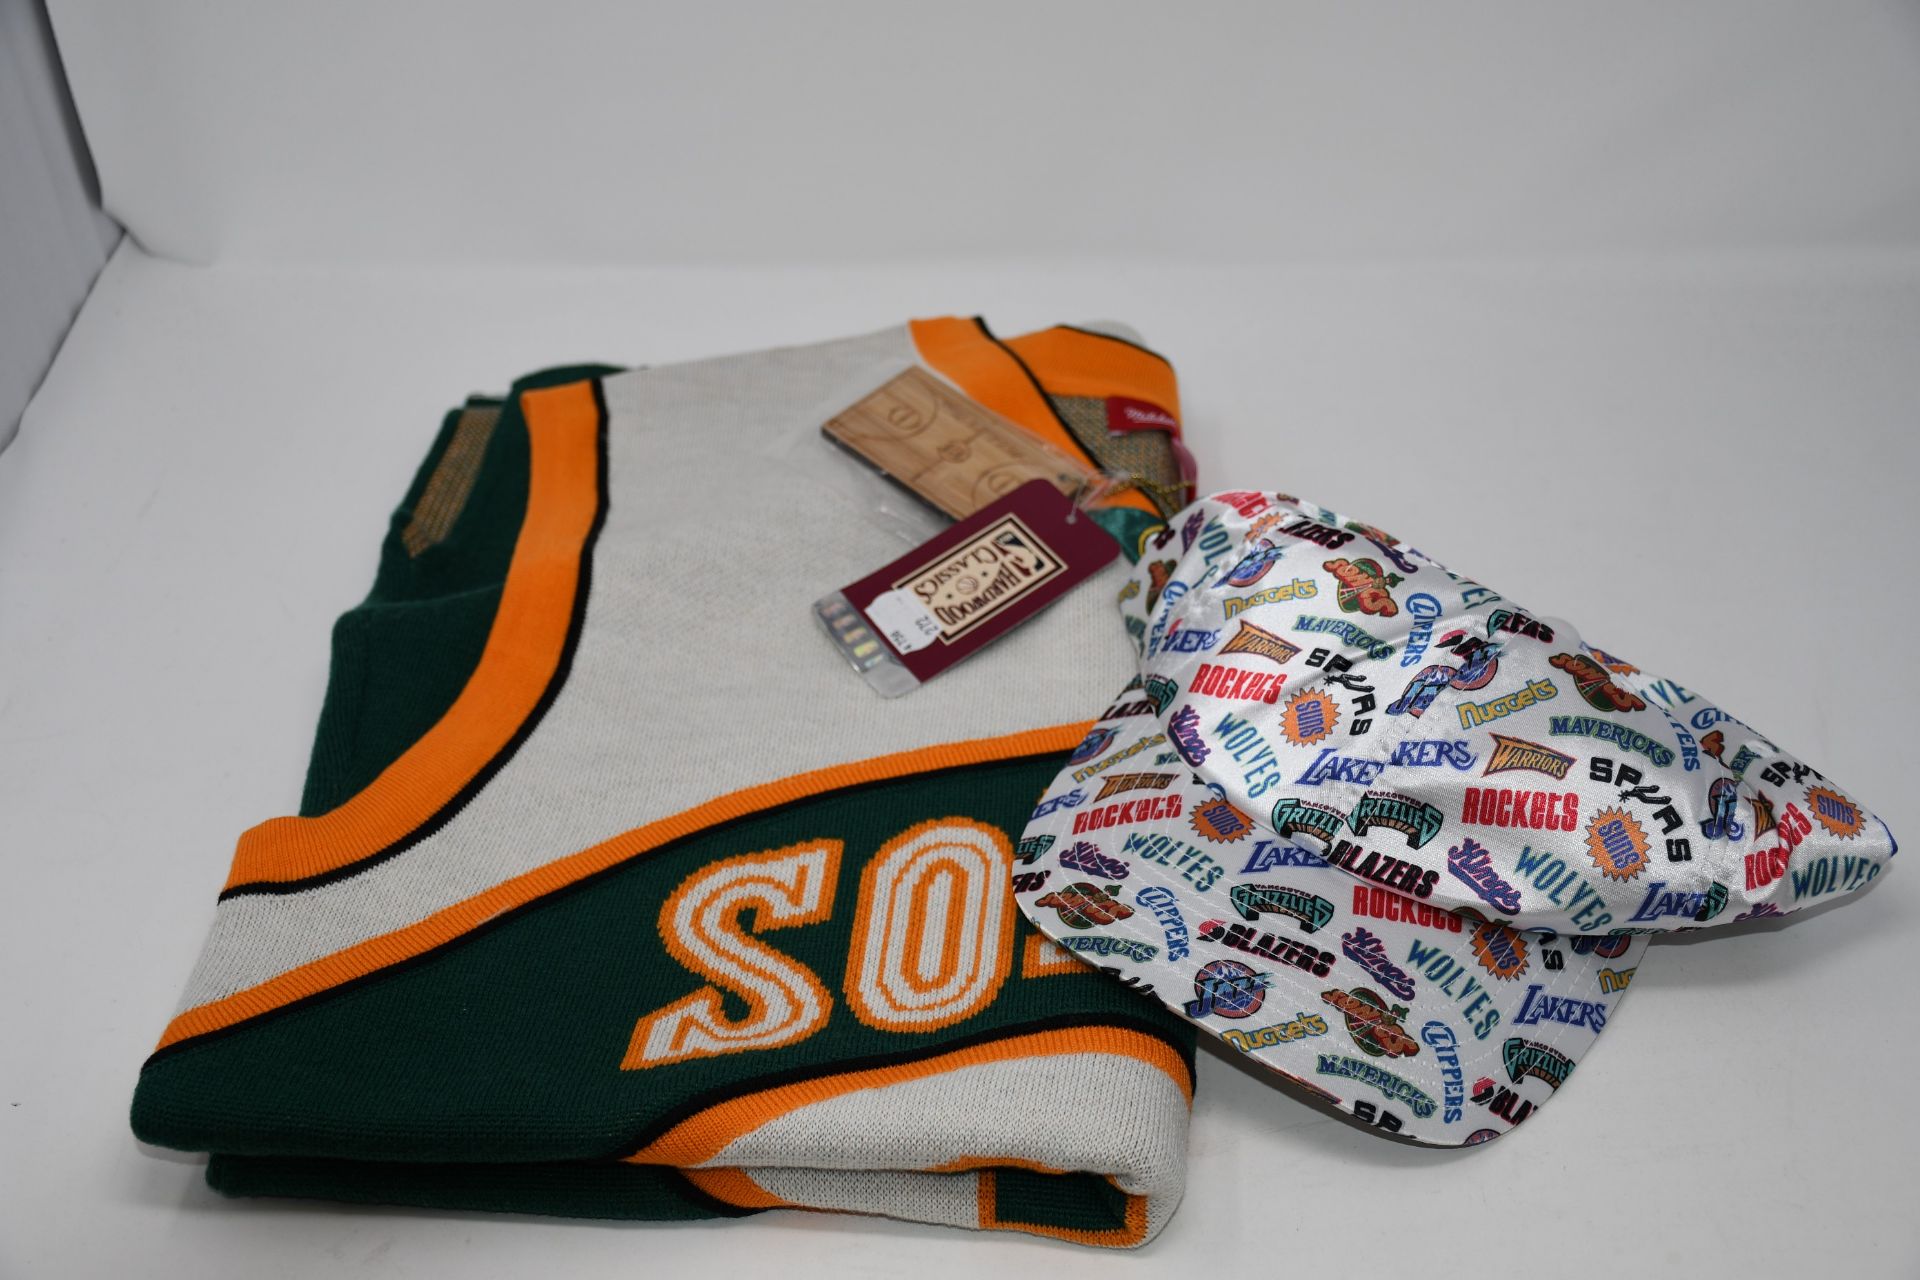 One as new Clot x M&N Knit Jersey Seattle SuperSonics 2007-08 Kevin Durant size M (SKU NNBJEY18120-